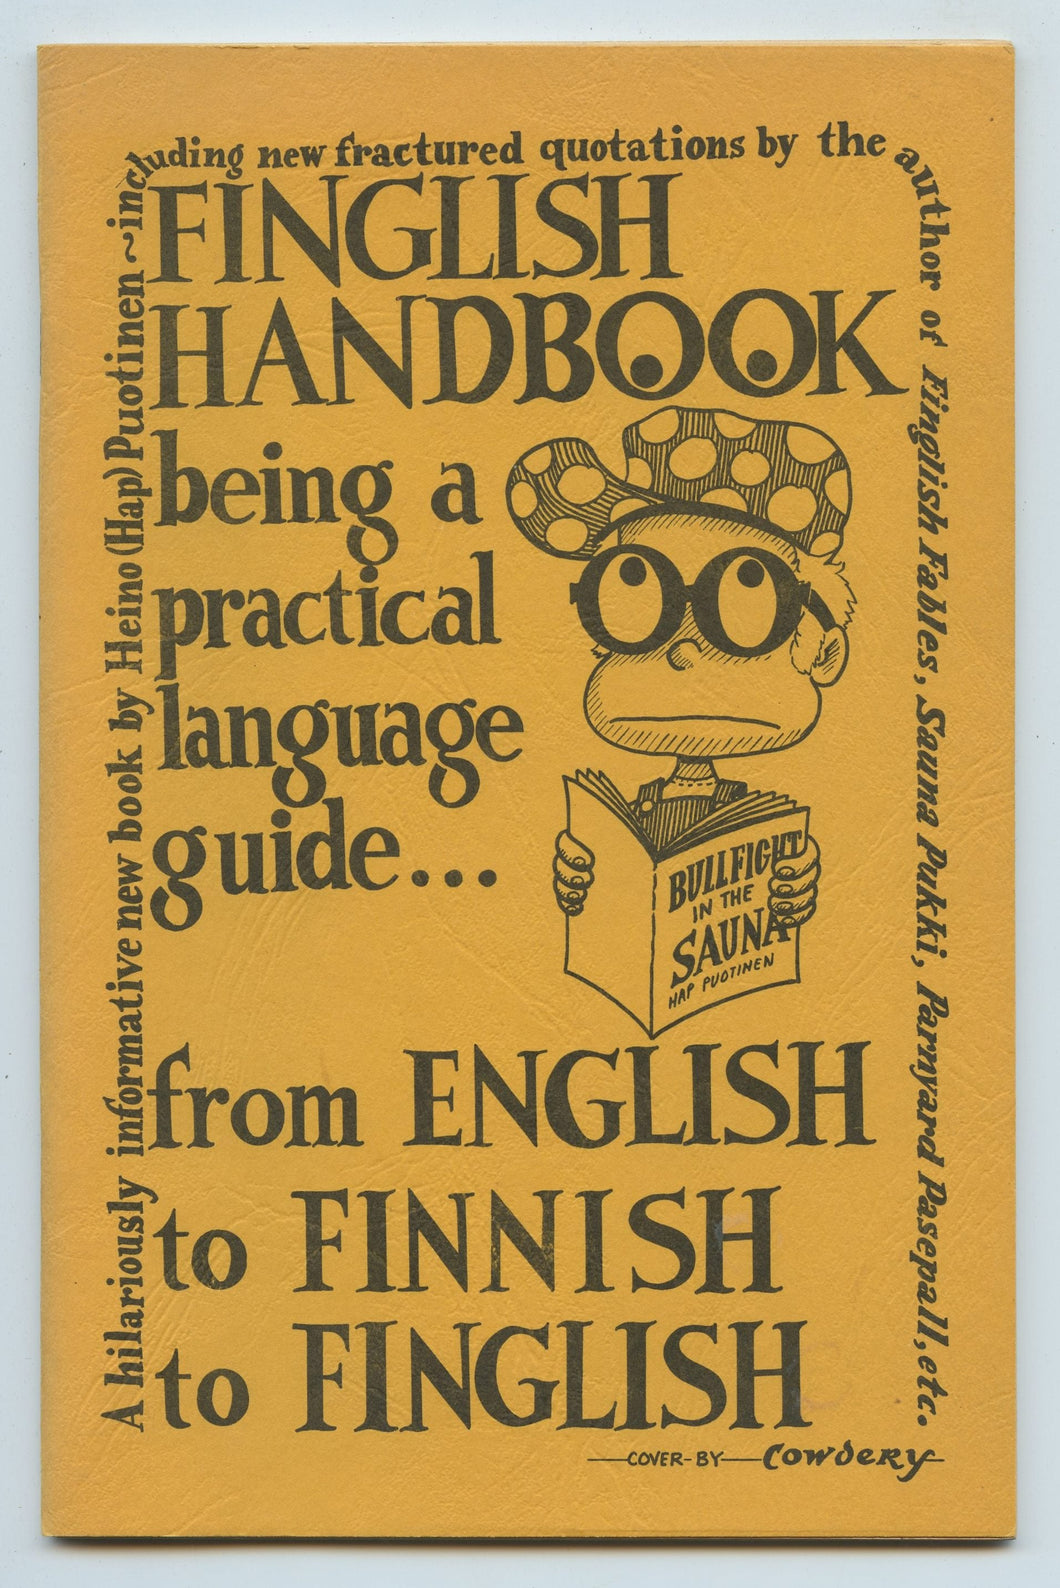 Finglish Handbook: being a practical language guide ... from English to finnish to Finglish